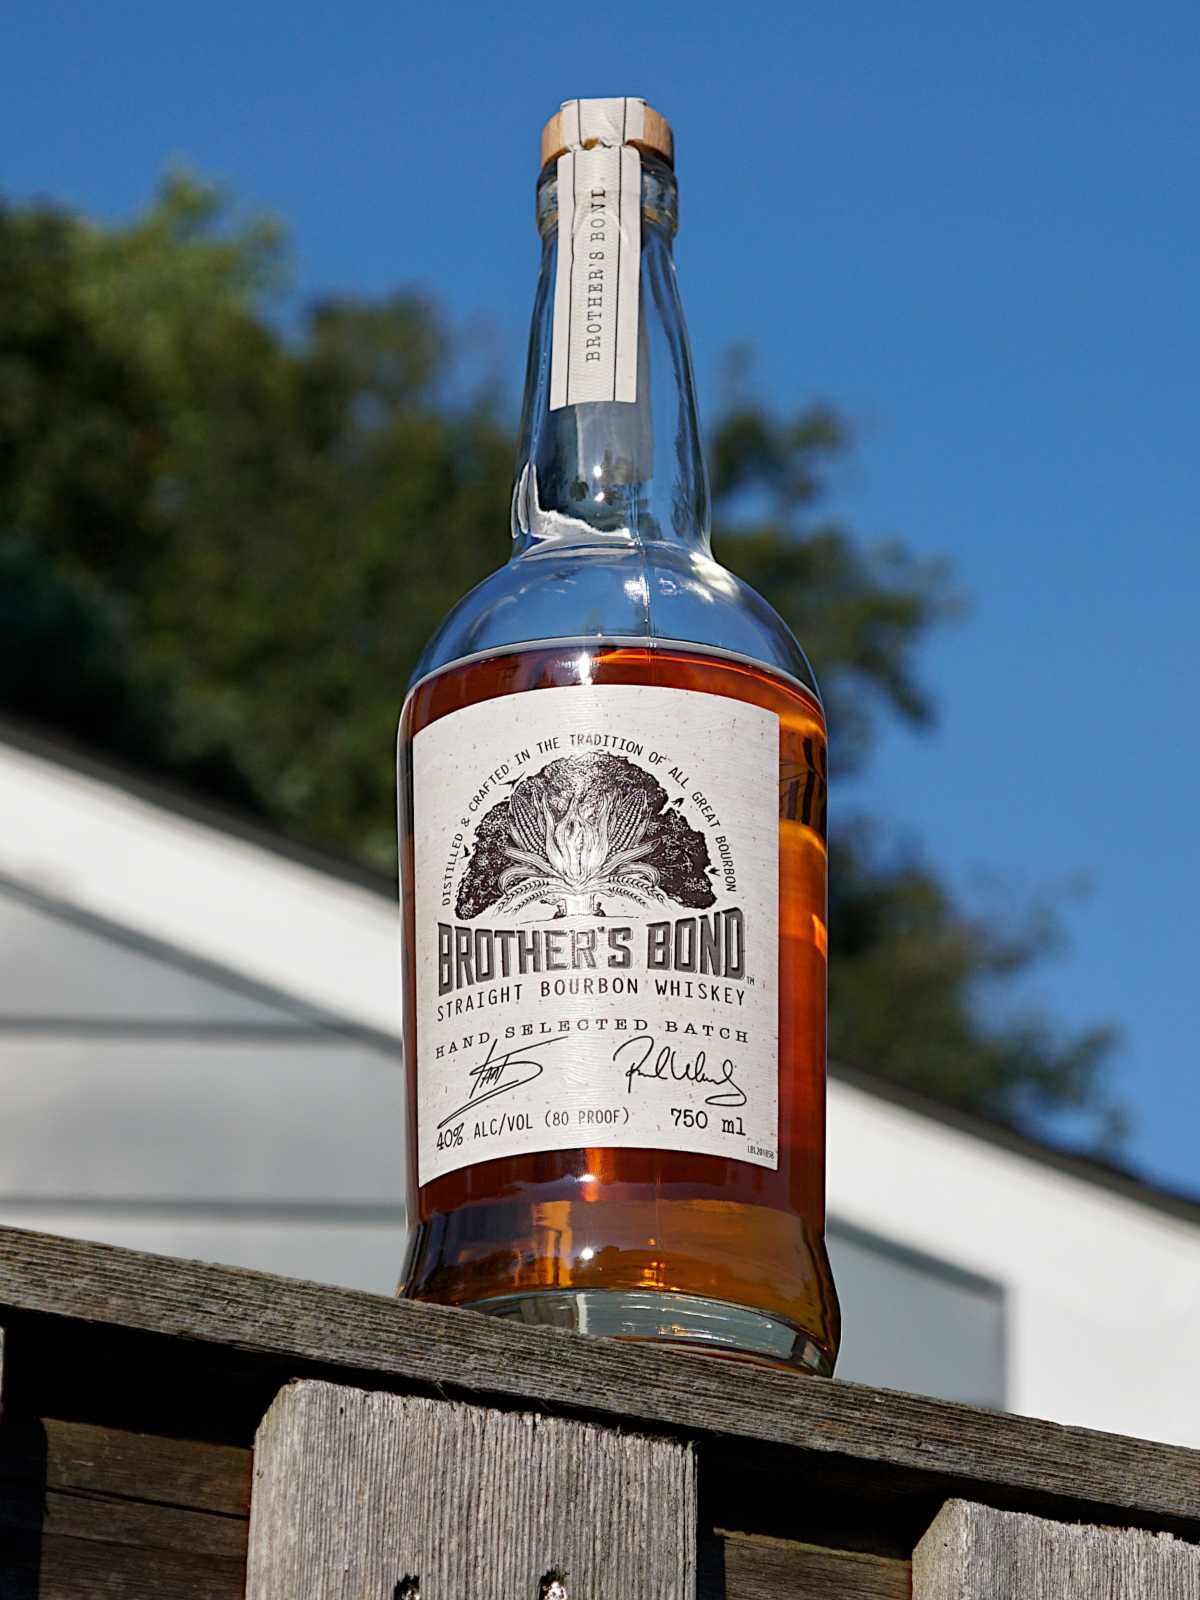 brother’s bond bourbon featured